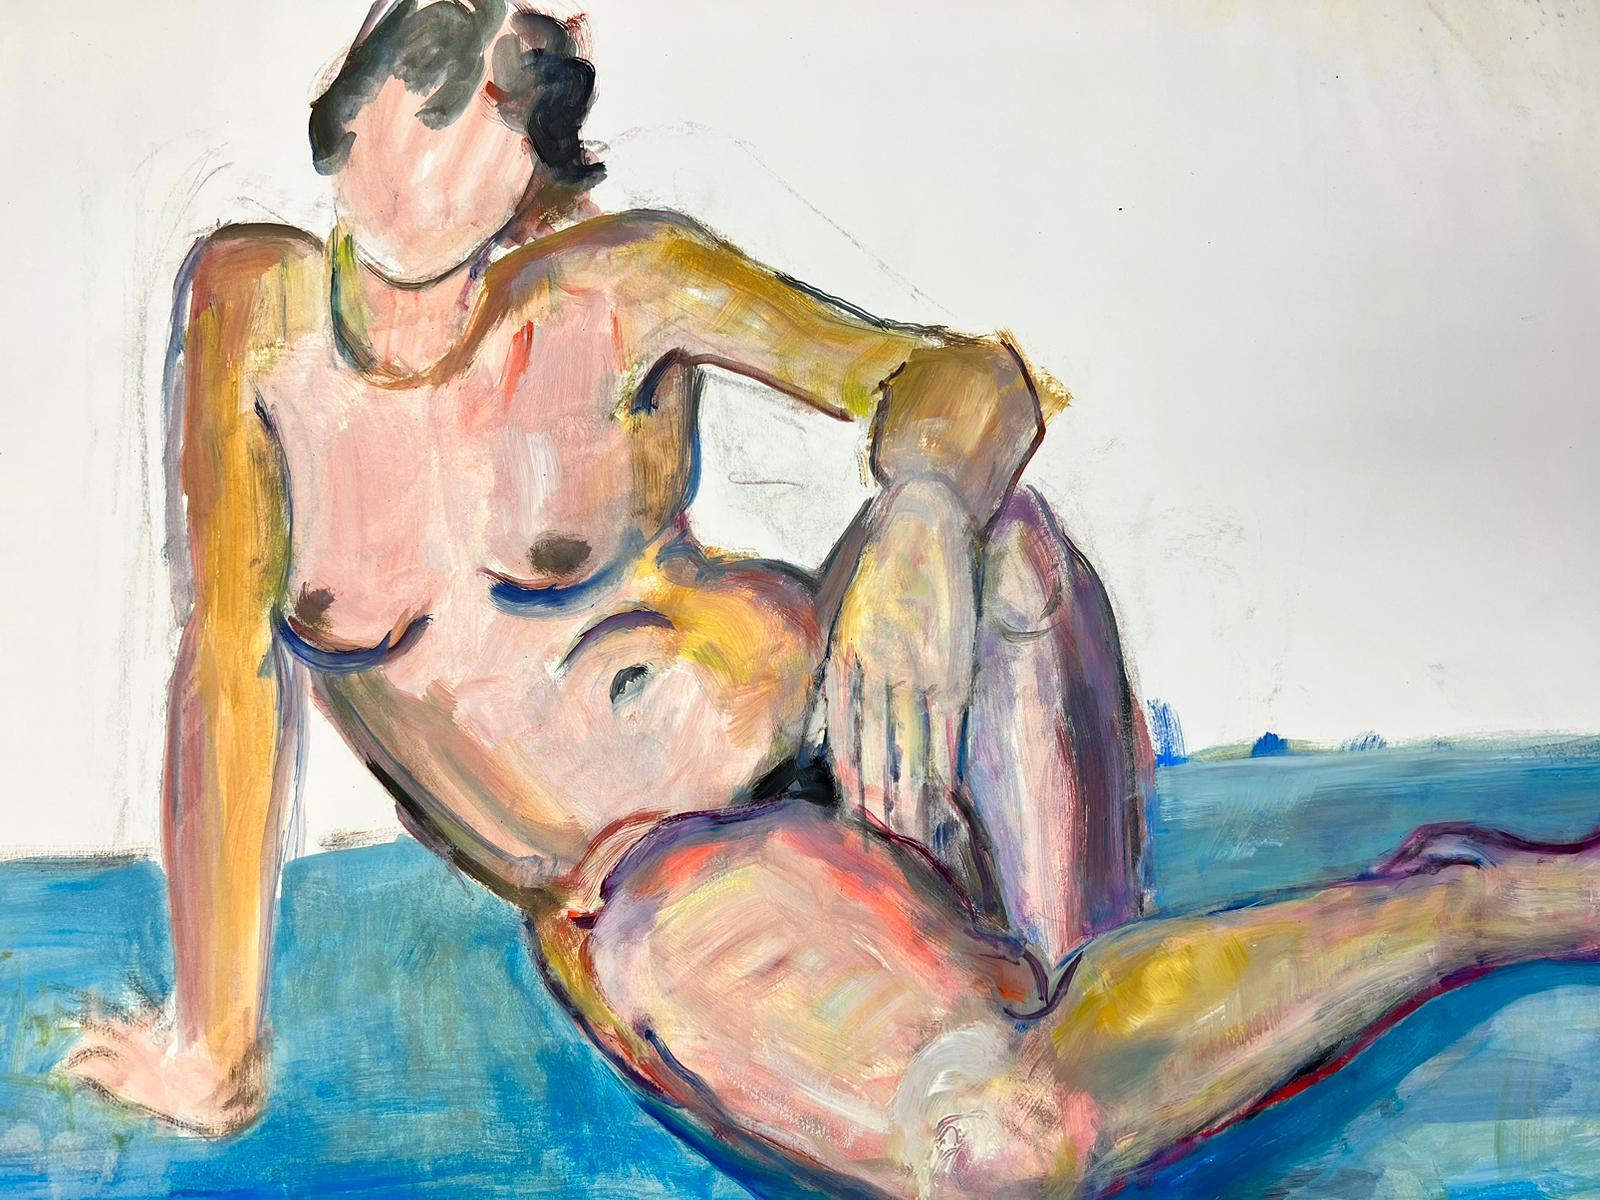 The Artists Model
Nude Lady Model
French School, circa 1970's
oil painting on card, unframed
size: 25.5 x 18 inches
condition: overall very good, a very few light markings to the surface but nothing detrimental to the appeal and appearance of the